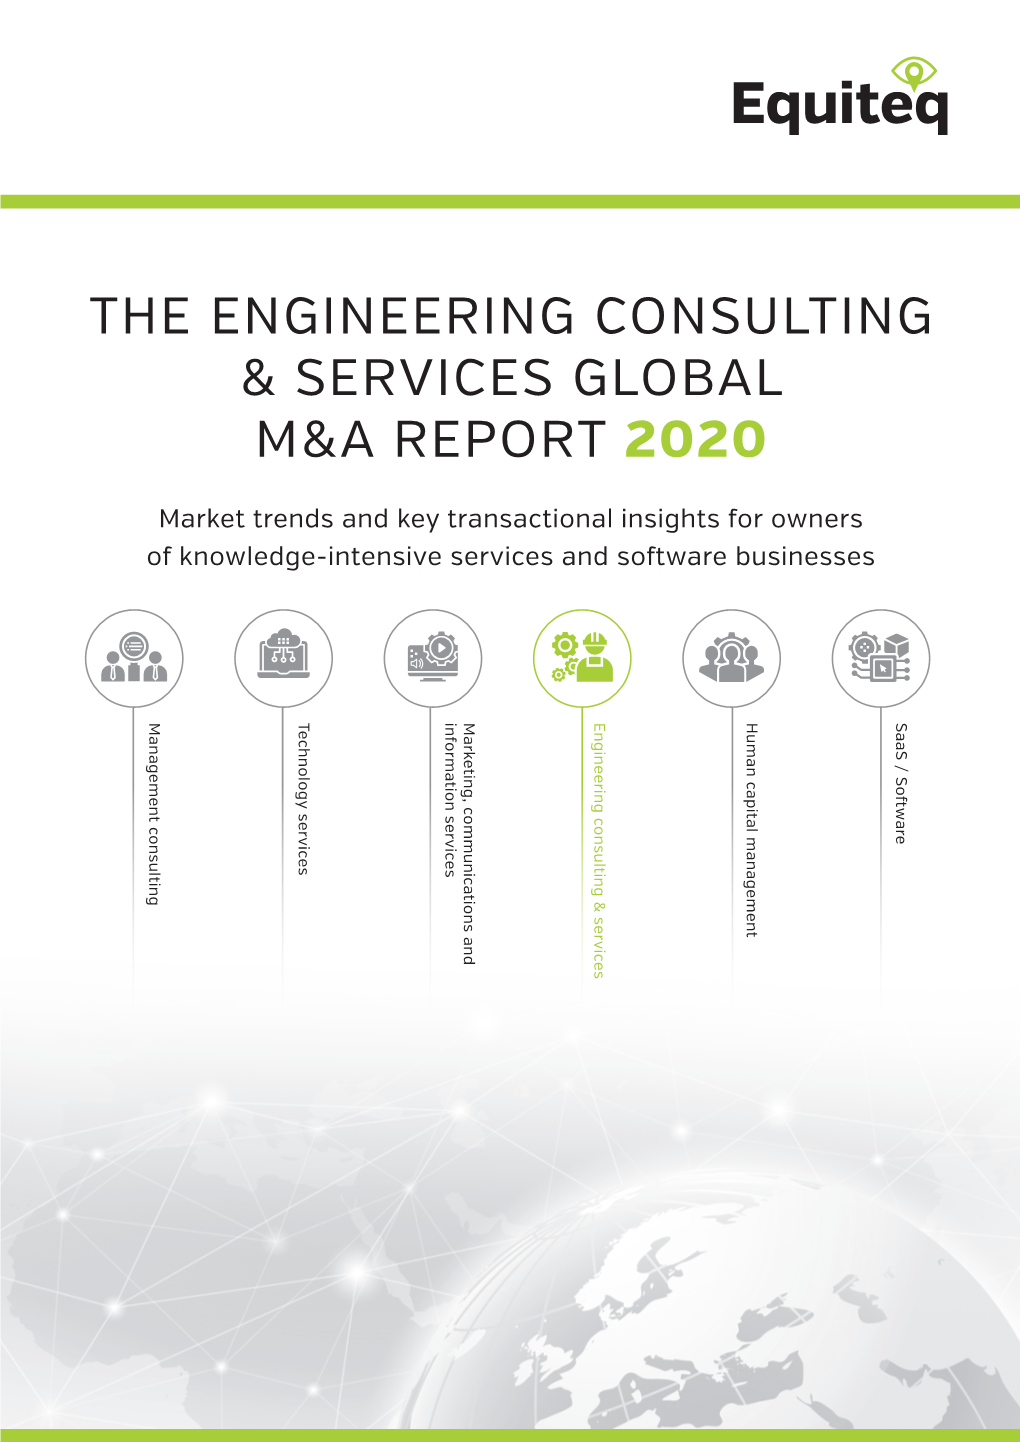 The Engineering Consulting & Services Global M&A Report